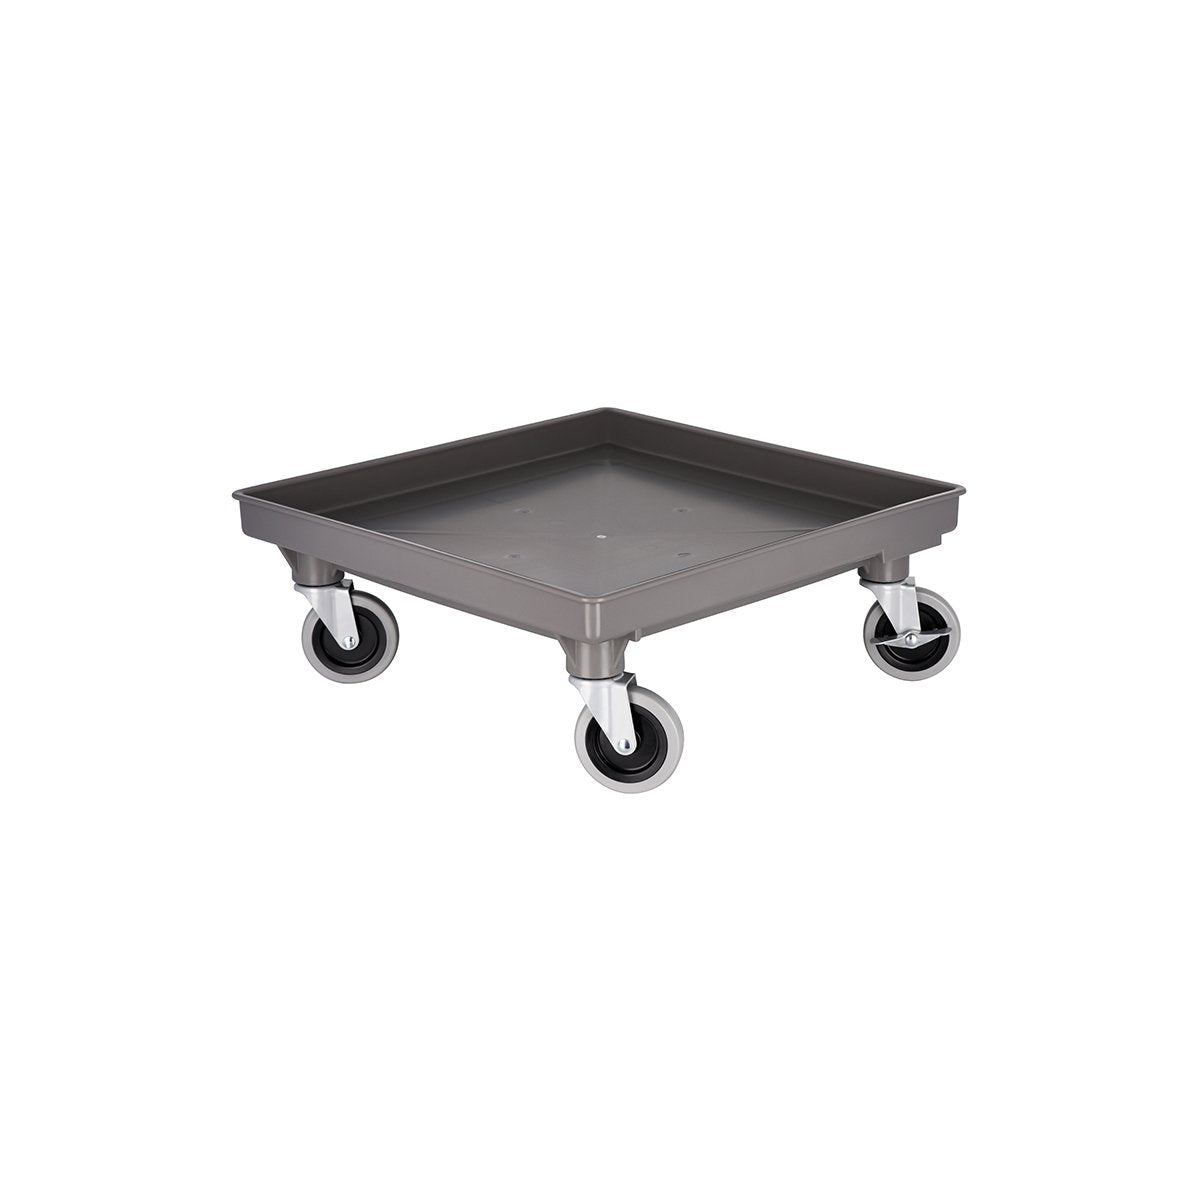 '09580 Unica Wash Rack Dolly with Wheels 540x540mm Tomkin Australia Hospitality Supplies